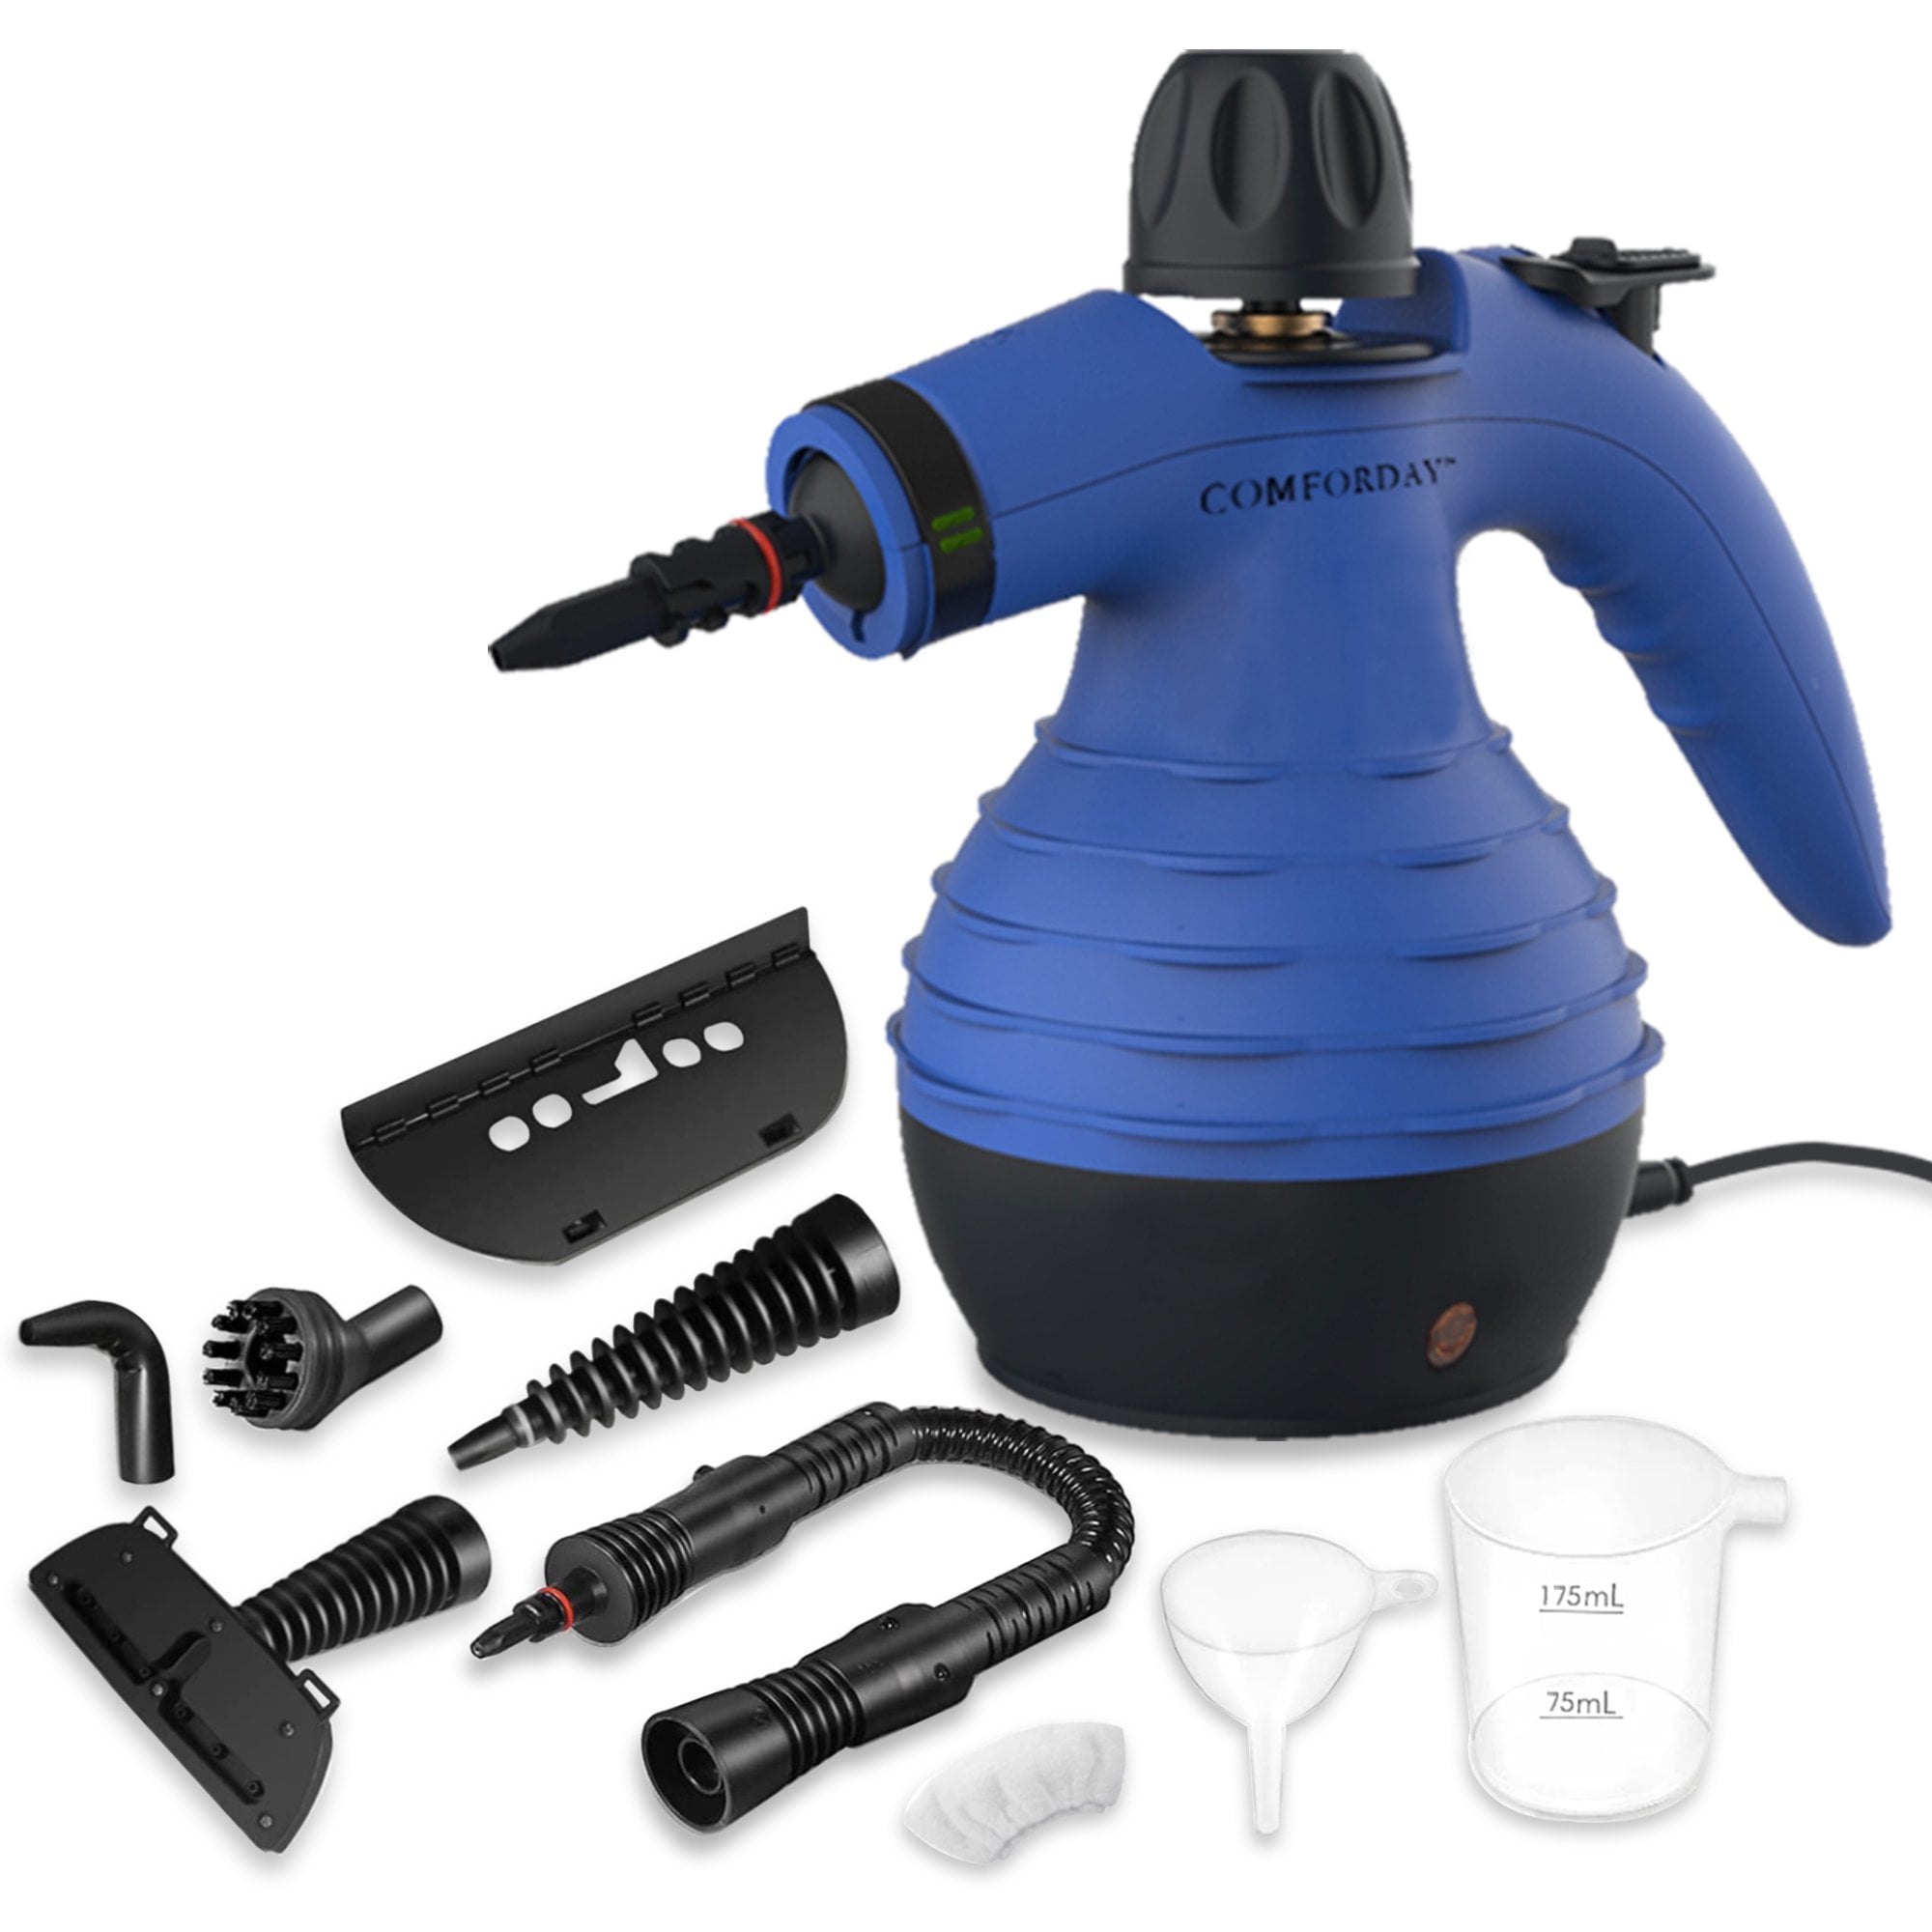 Best Uses for Your Handheld Steam Cleaner